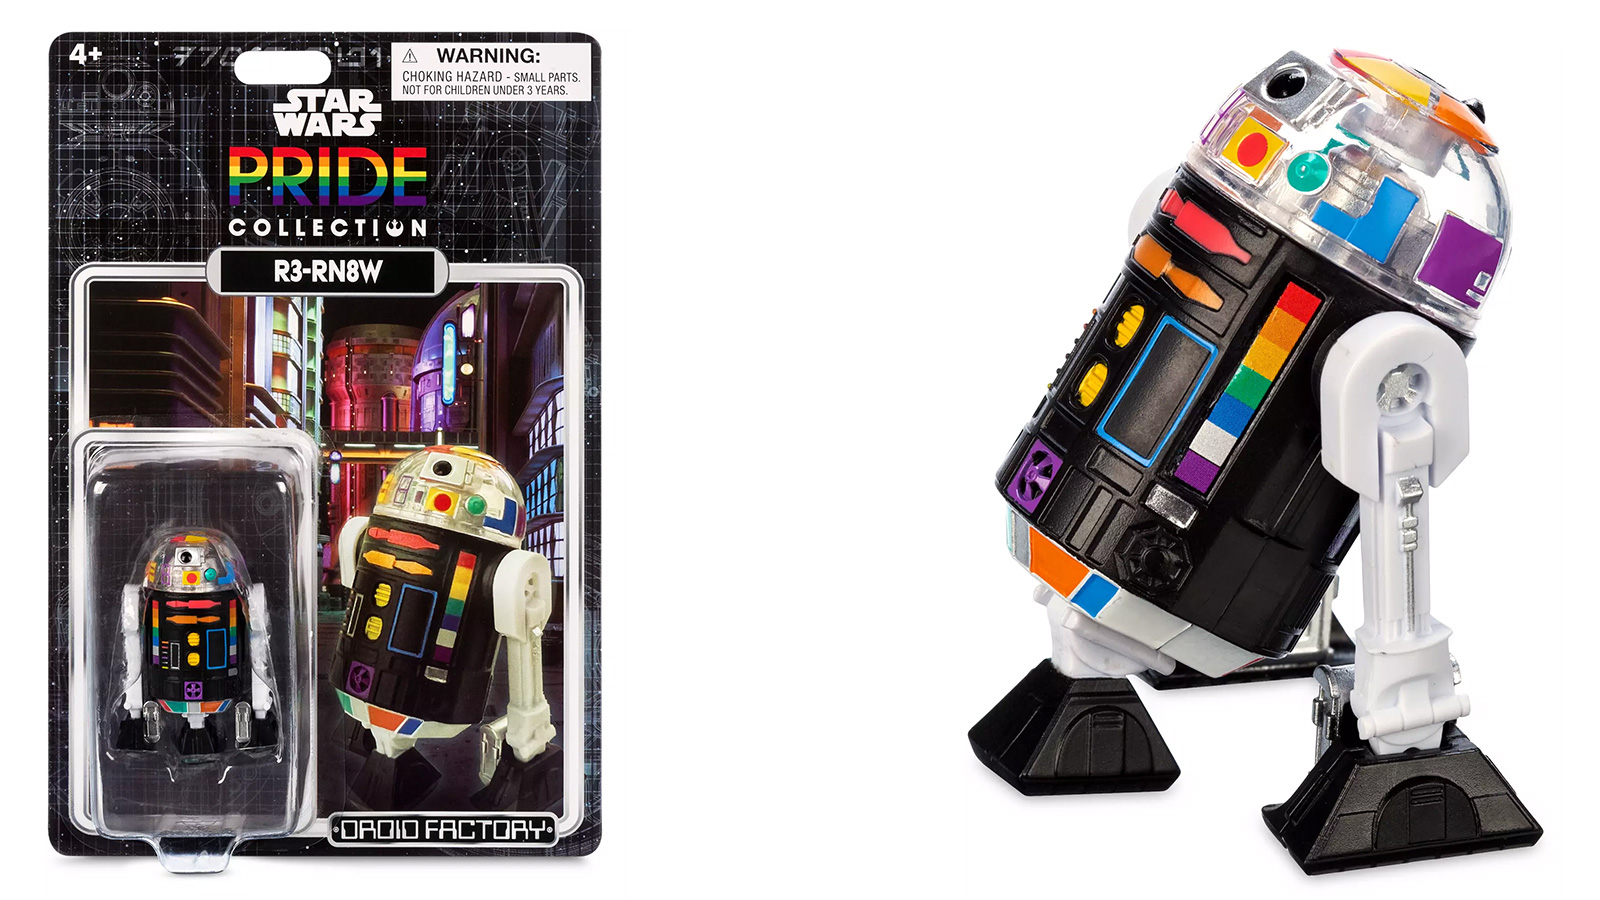 In Stock At Disney Store - Exclusive Droid Factory R3-RN8W